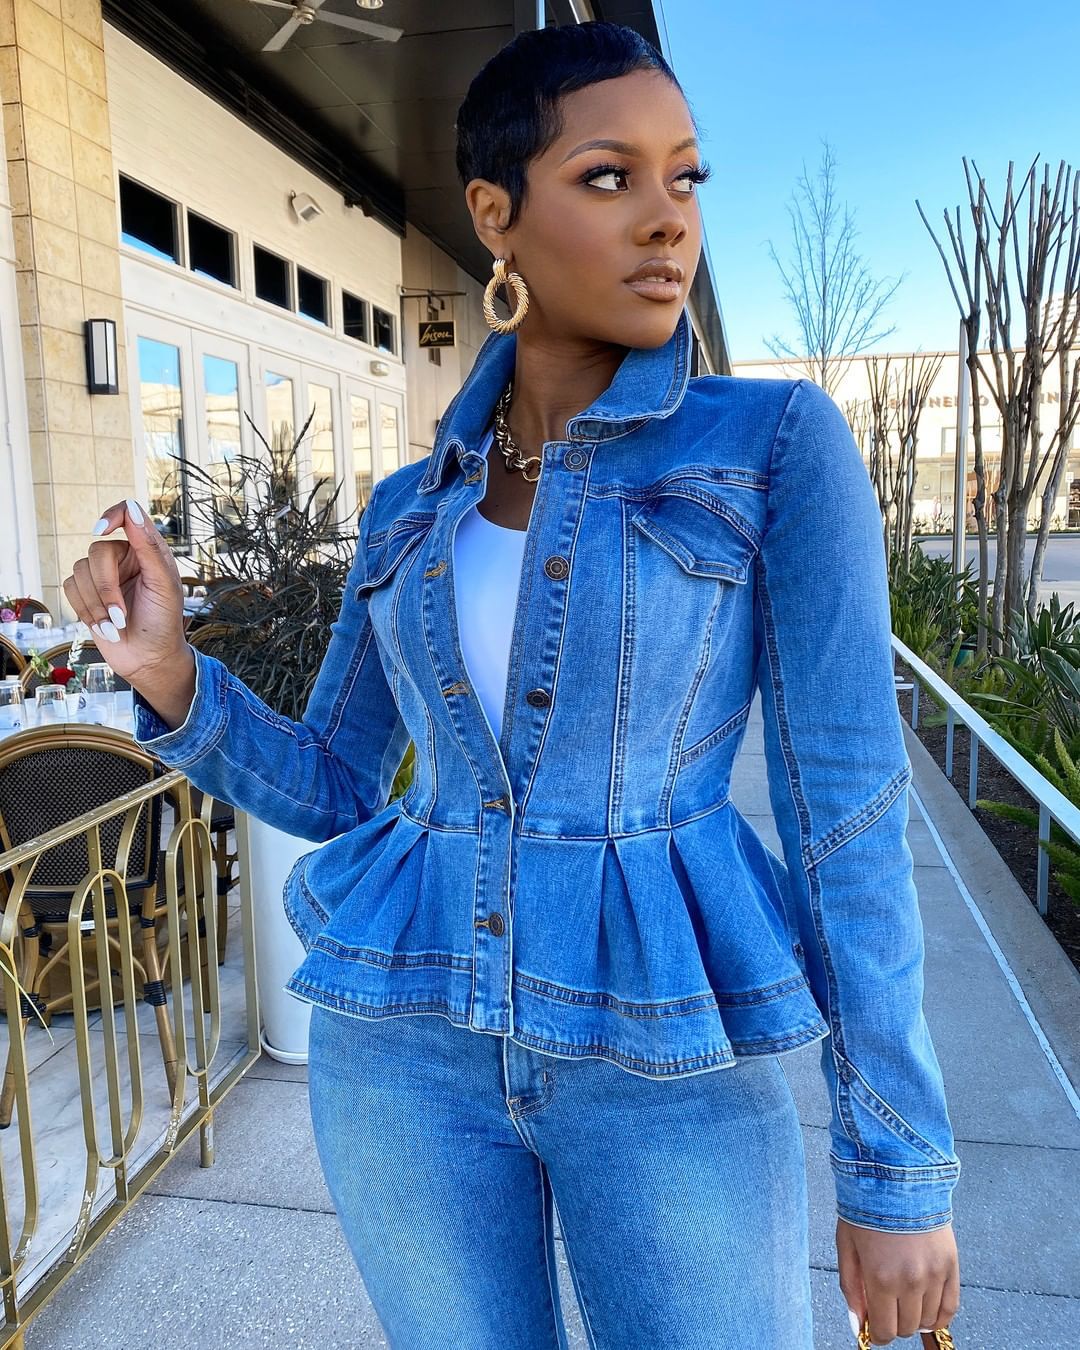 Back to School Personalized Solid Loose Women's Denim Jacket Blue Washed Fashion Street Style Skirt Shaped Coat Autumn Winter Commute Top 7102